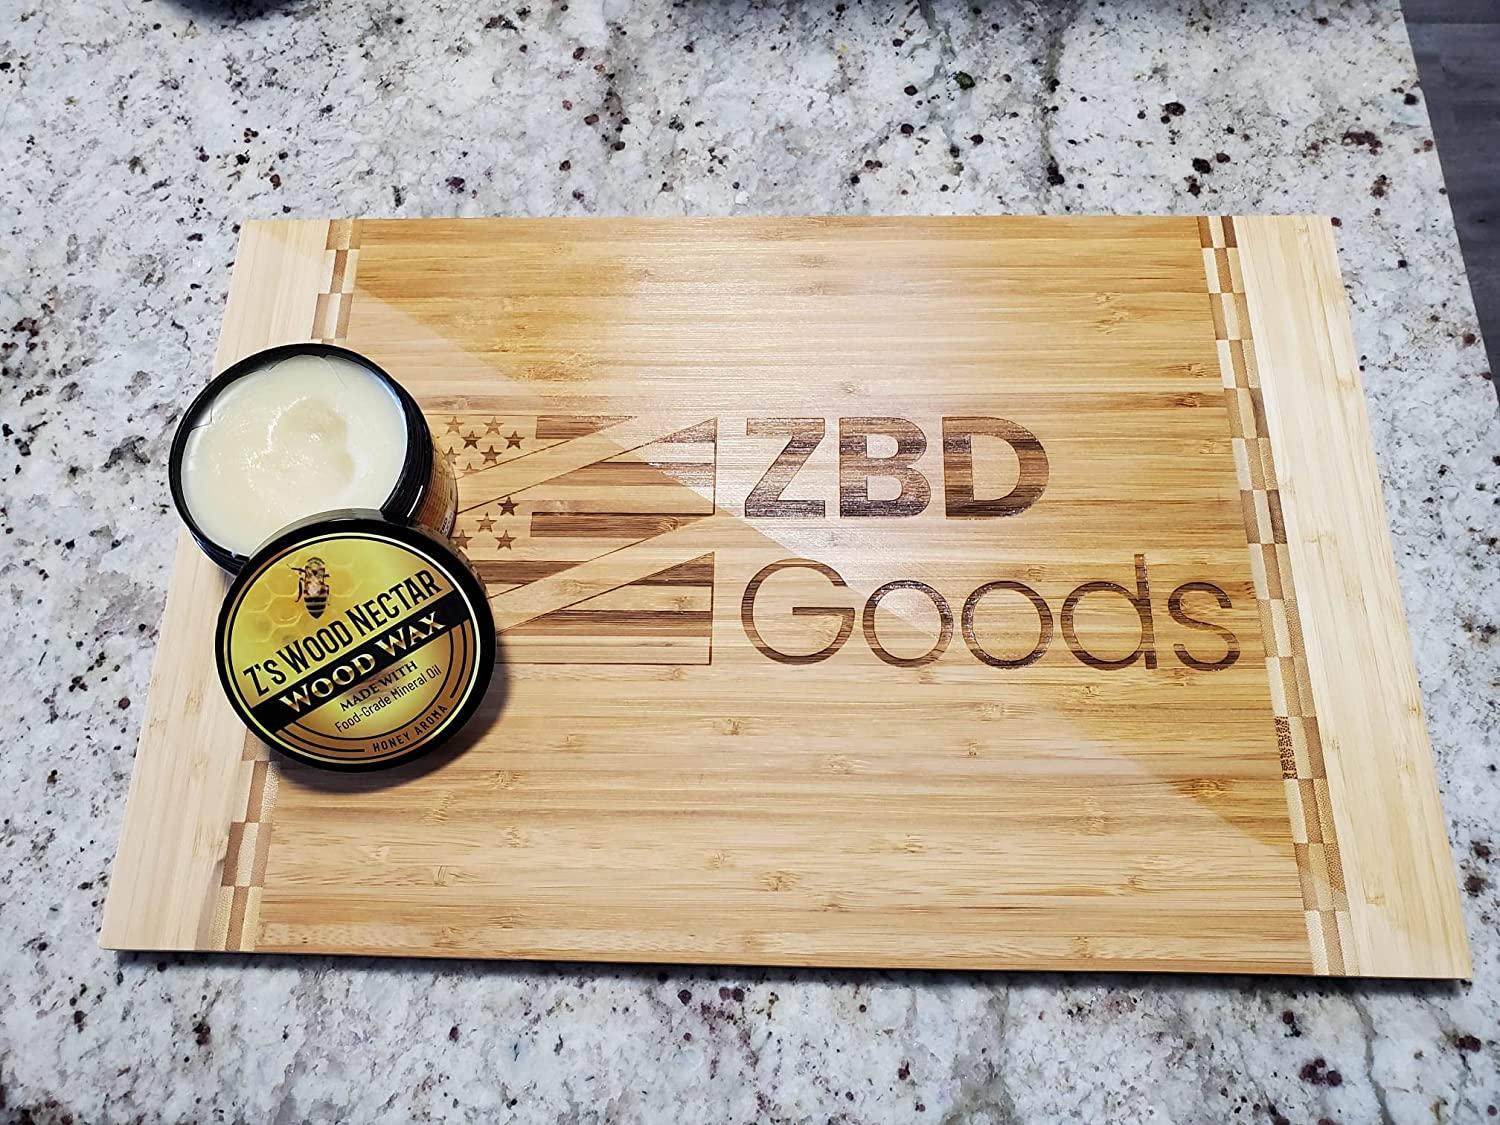 Zs Wood Nectar Wood Wax-Cutting Boards Butcher Blocks Counter Tops and more  (9oz) Made with Food-Grade Mineral Oil Beeswax Carnauba Wax - Sent-  Unscented